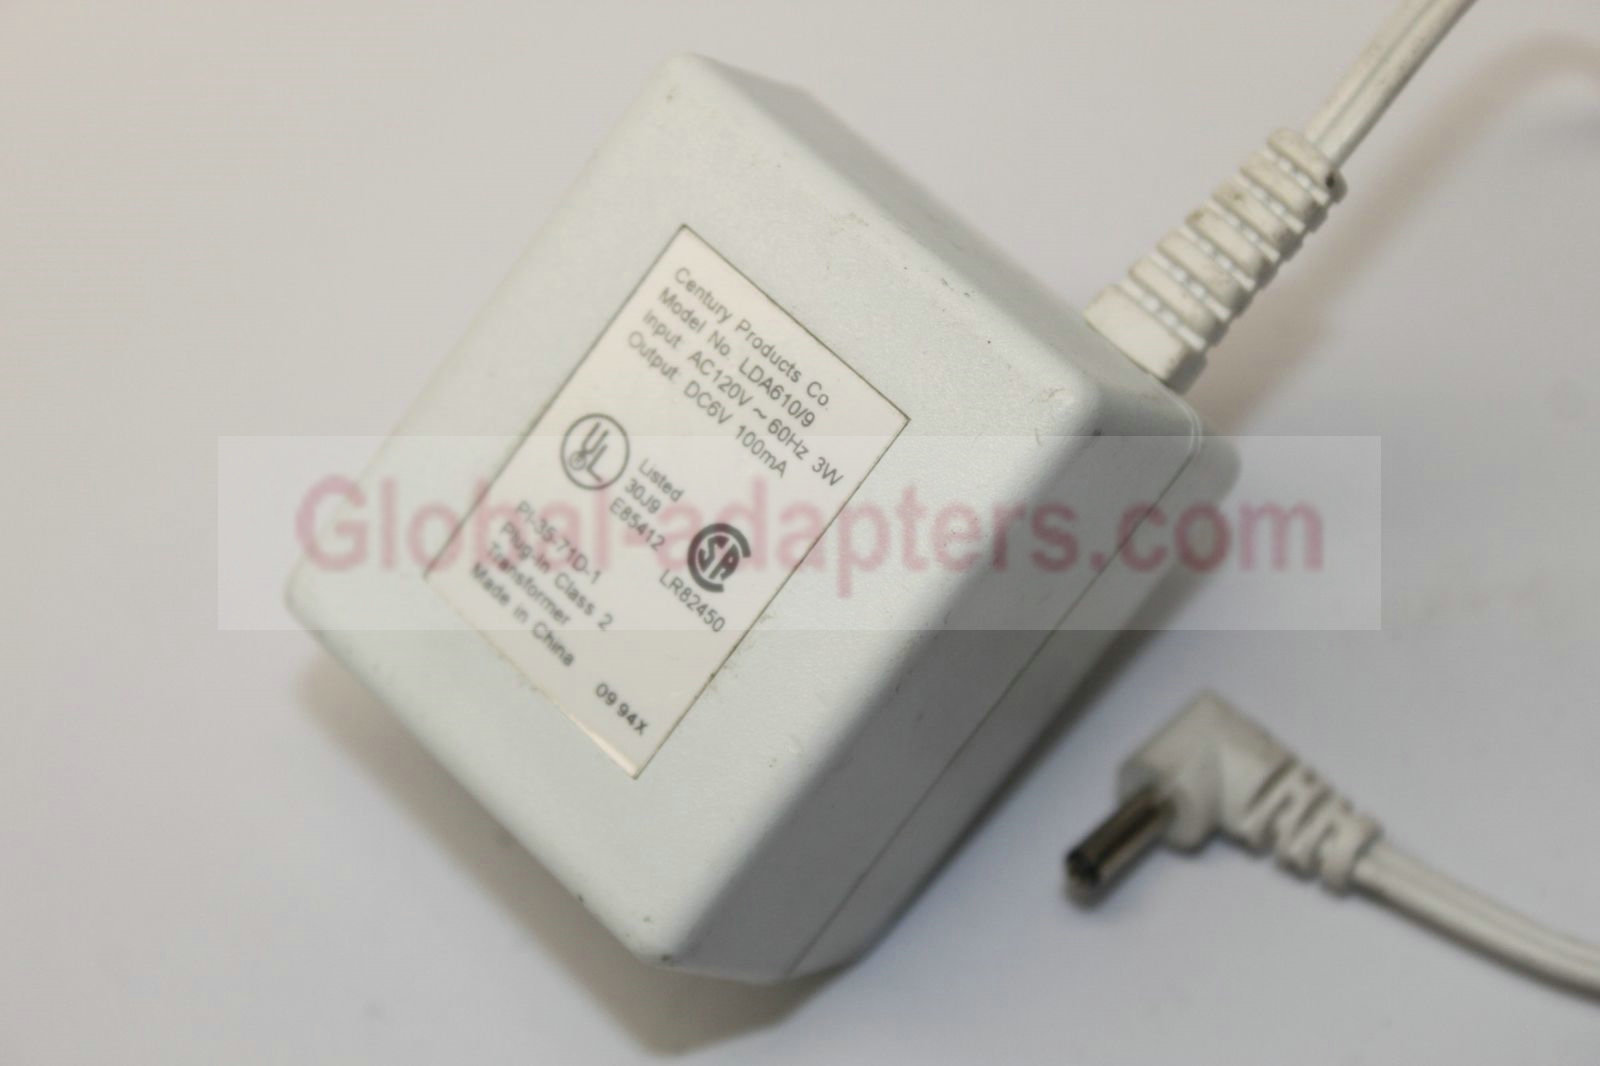 New 6V 1A Products LDA610/9 Class 2 Transformer Power Supply Ac Adapter - Click Image to Close